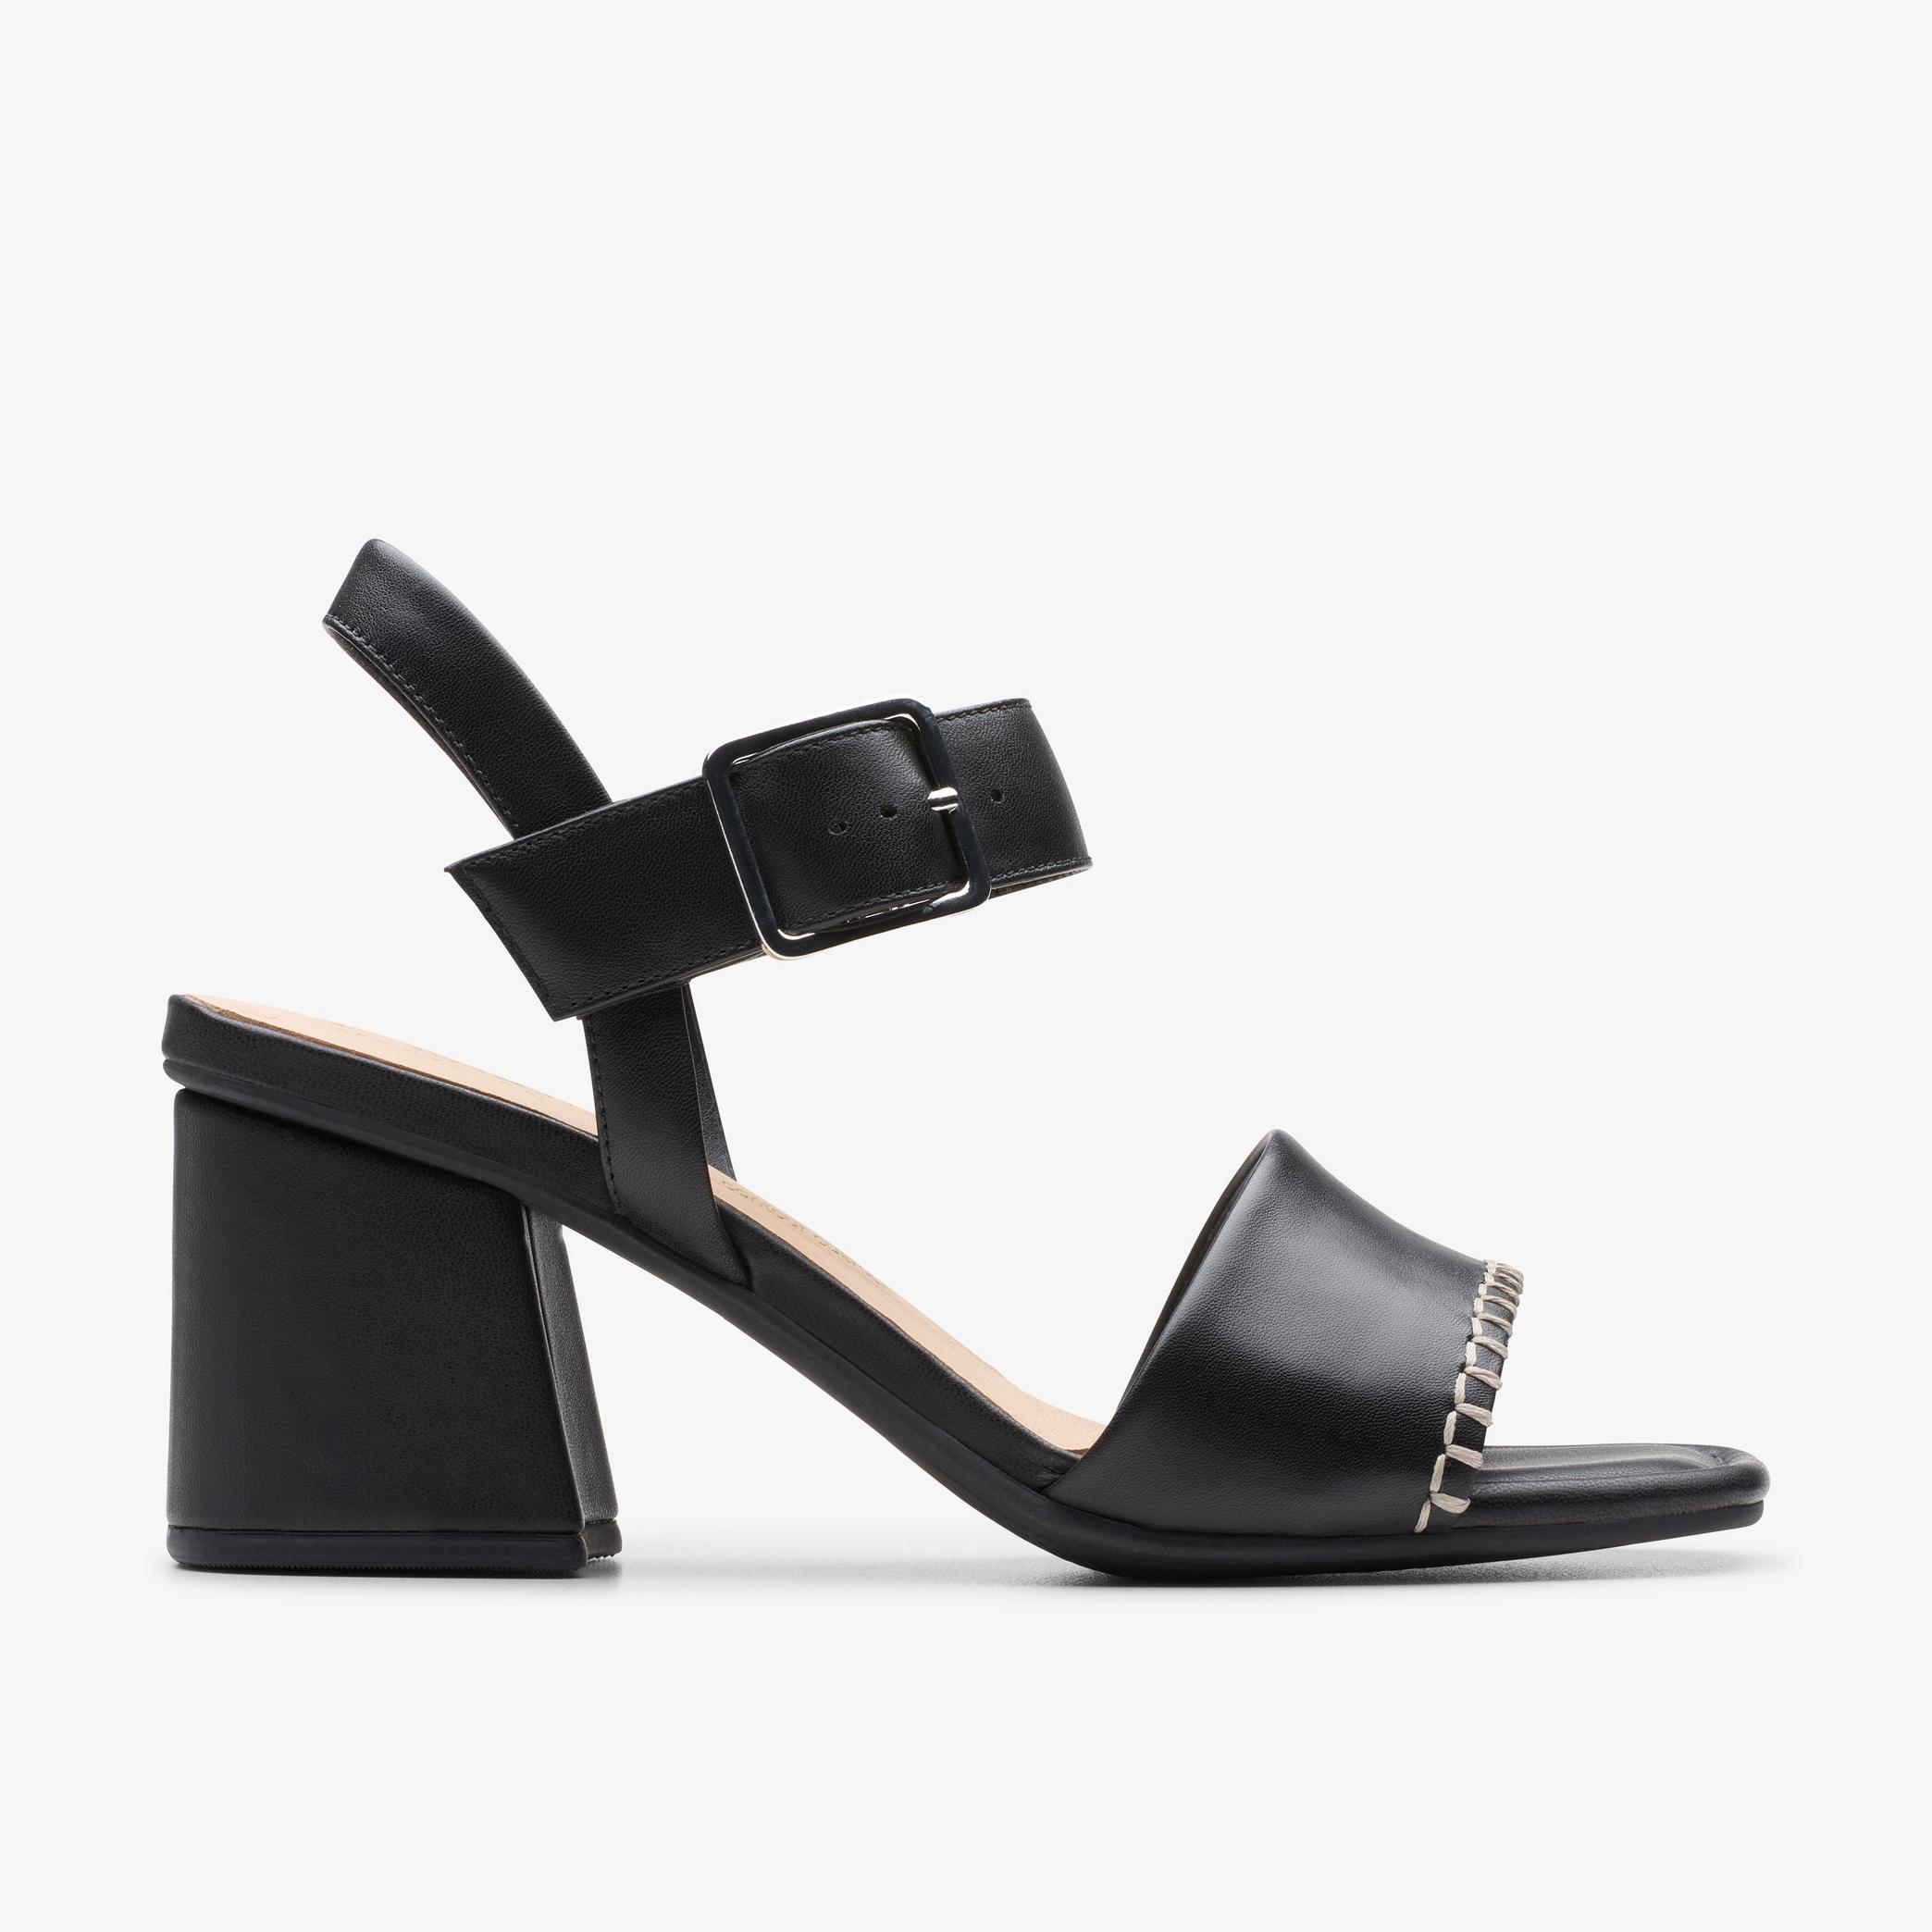 Siara65 Buckle Black Leather Heeled Sandals, view 1 of 6